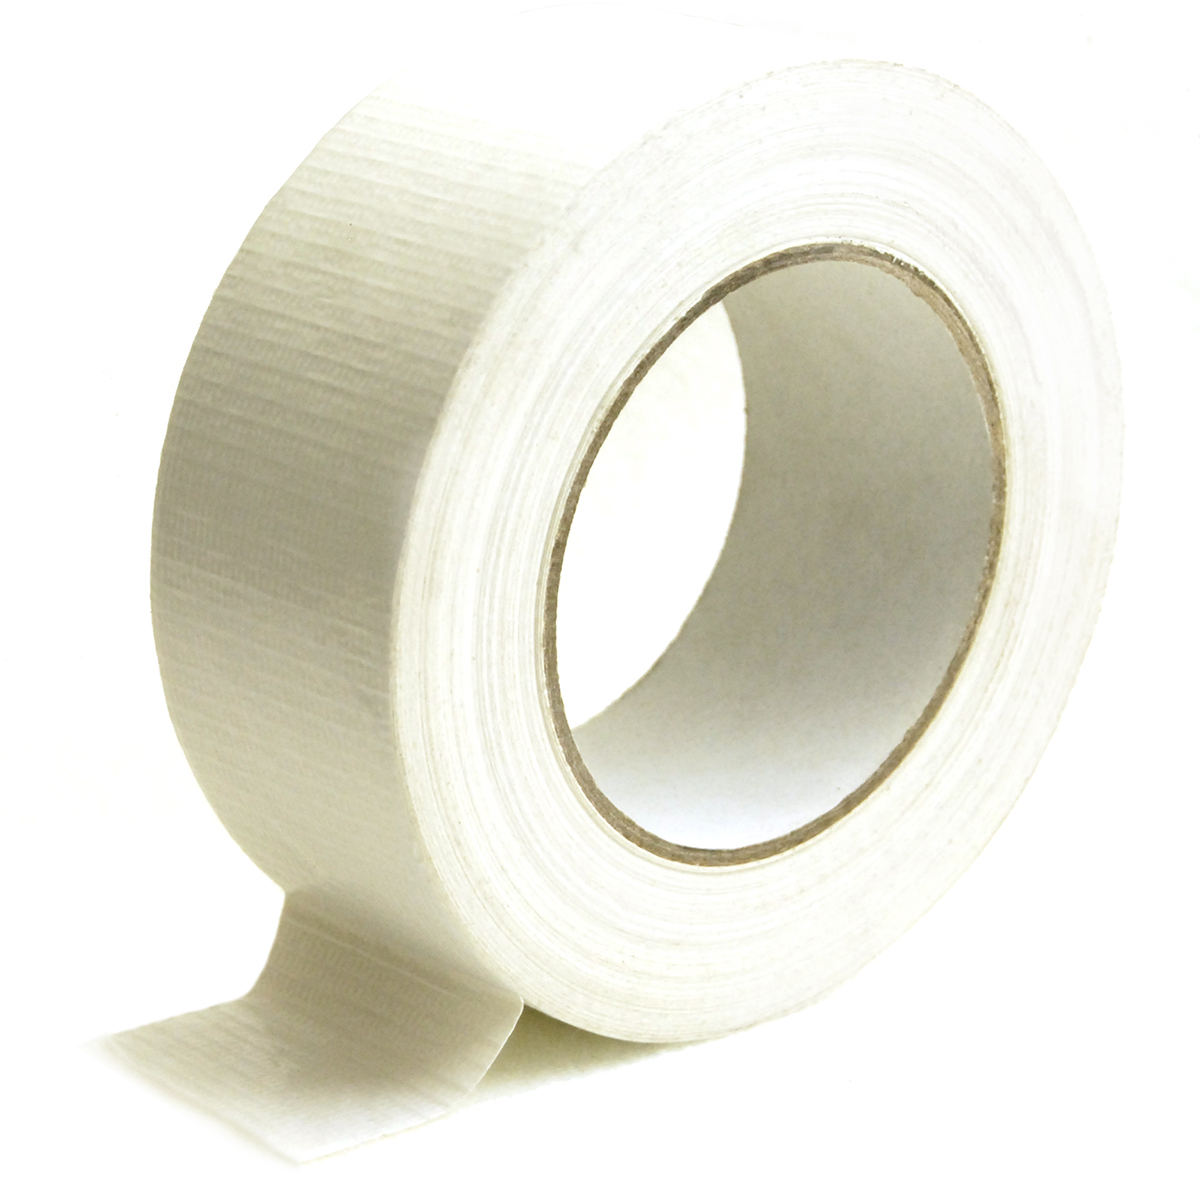 duct tape 48,5mm x 50m White - verpacking